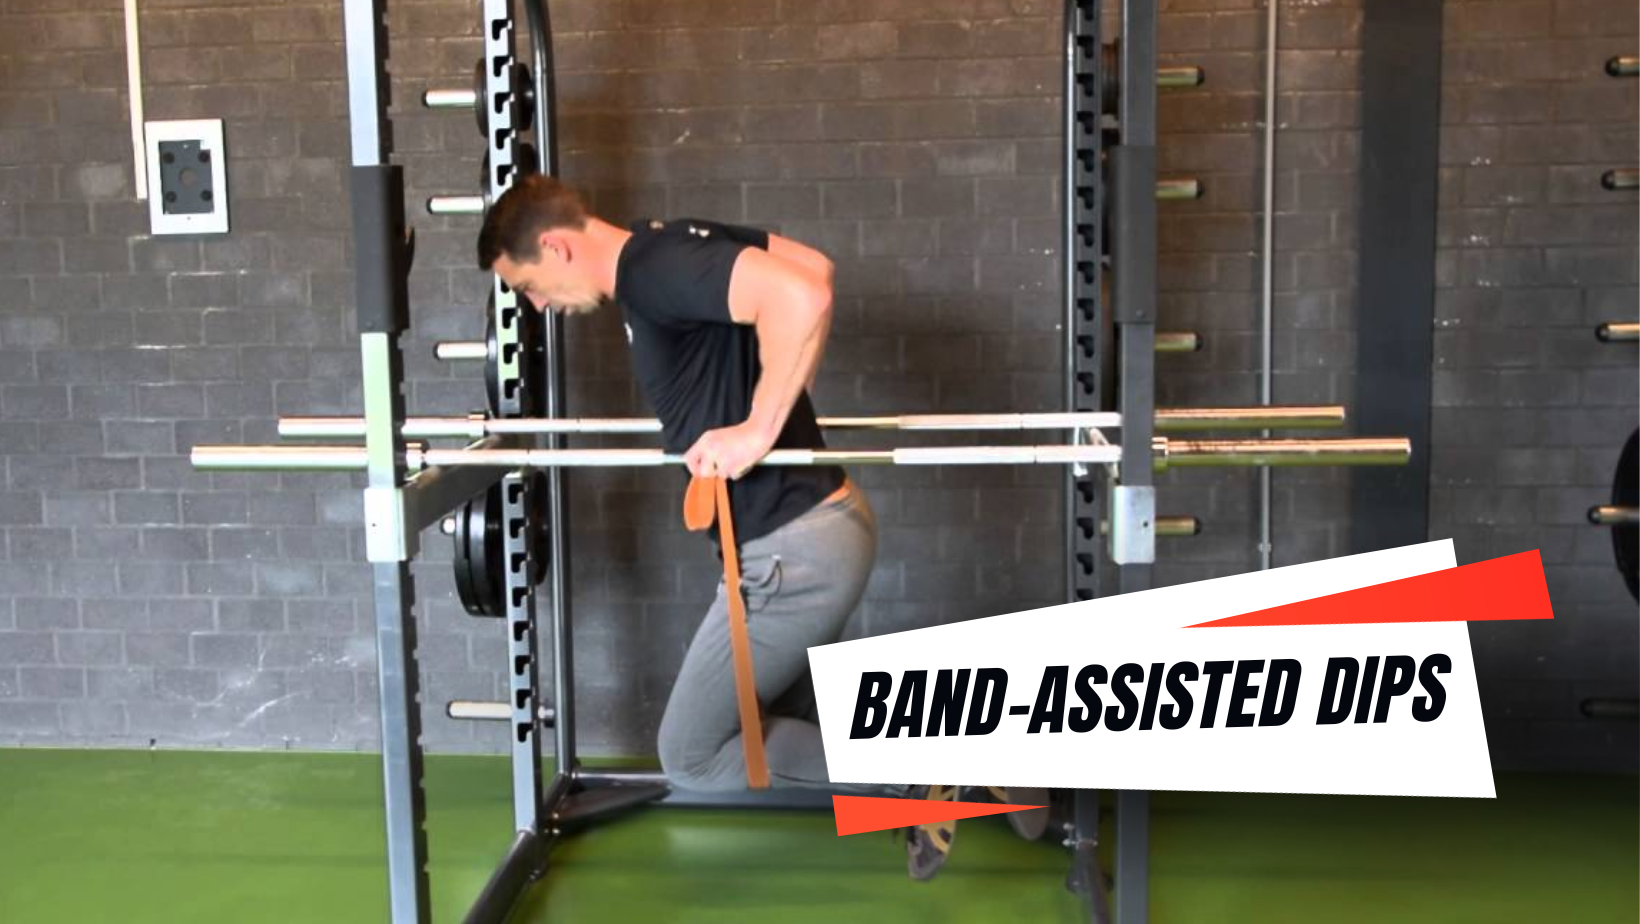 Band-Assisted Dips